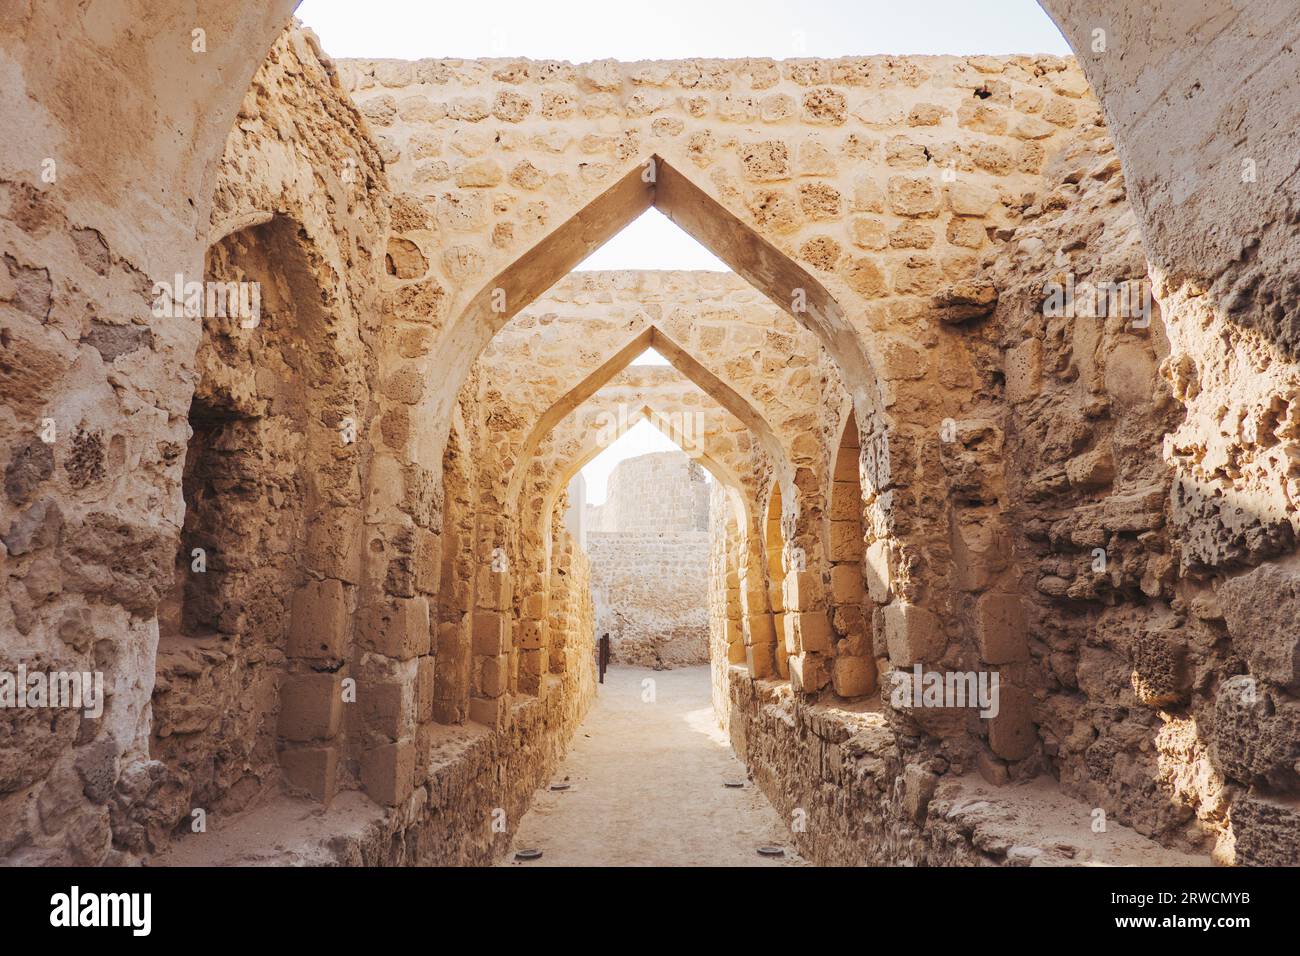 stone archways in Qal'at al-Bahrain, a fort dating back to 2300 BCE, abandoned by the Portuguese in the 16th century, in Bahrain Stock Photo